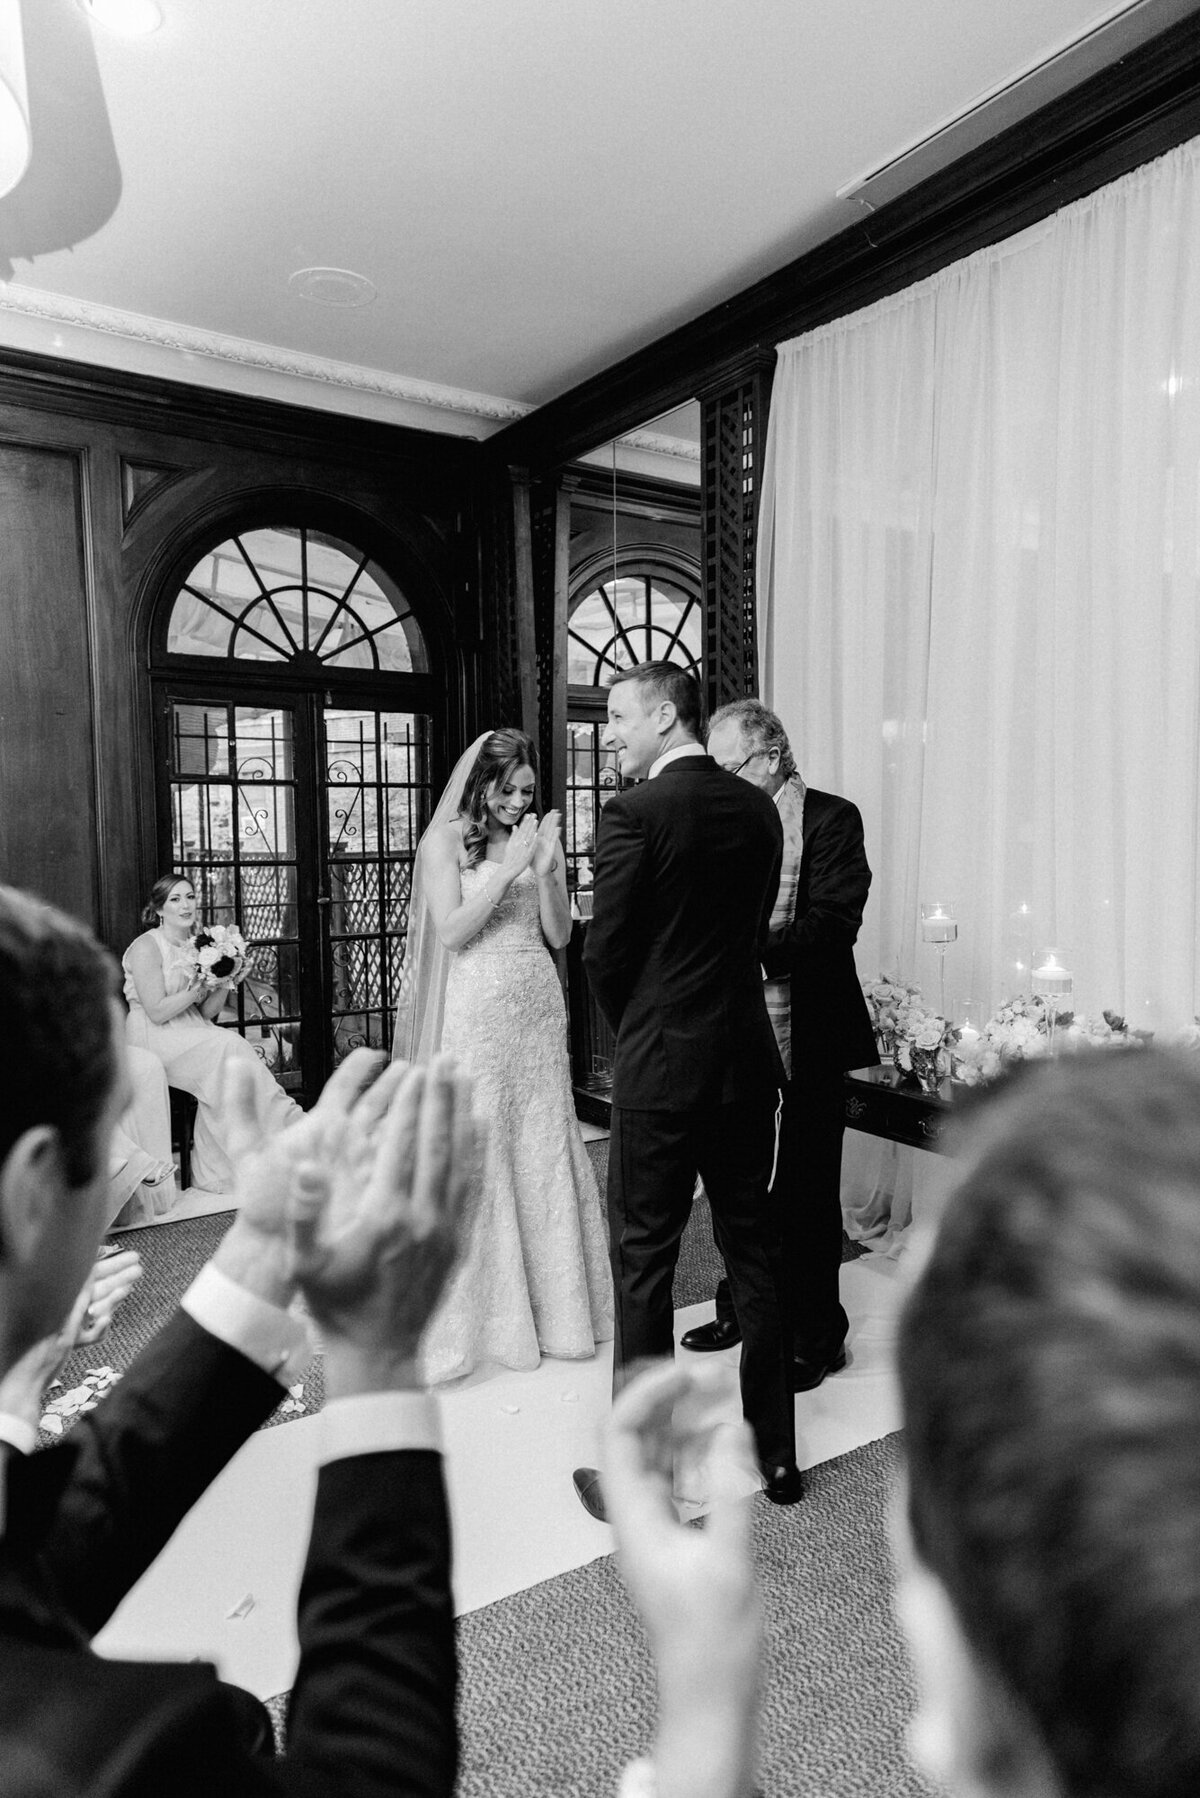 A candid wedding ceremony moment captured at Salvatore's in Chicago